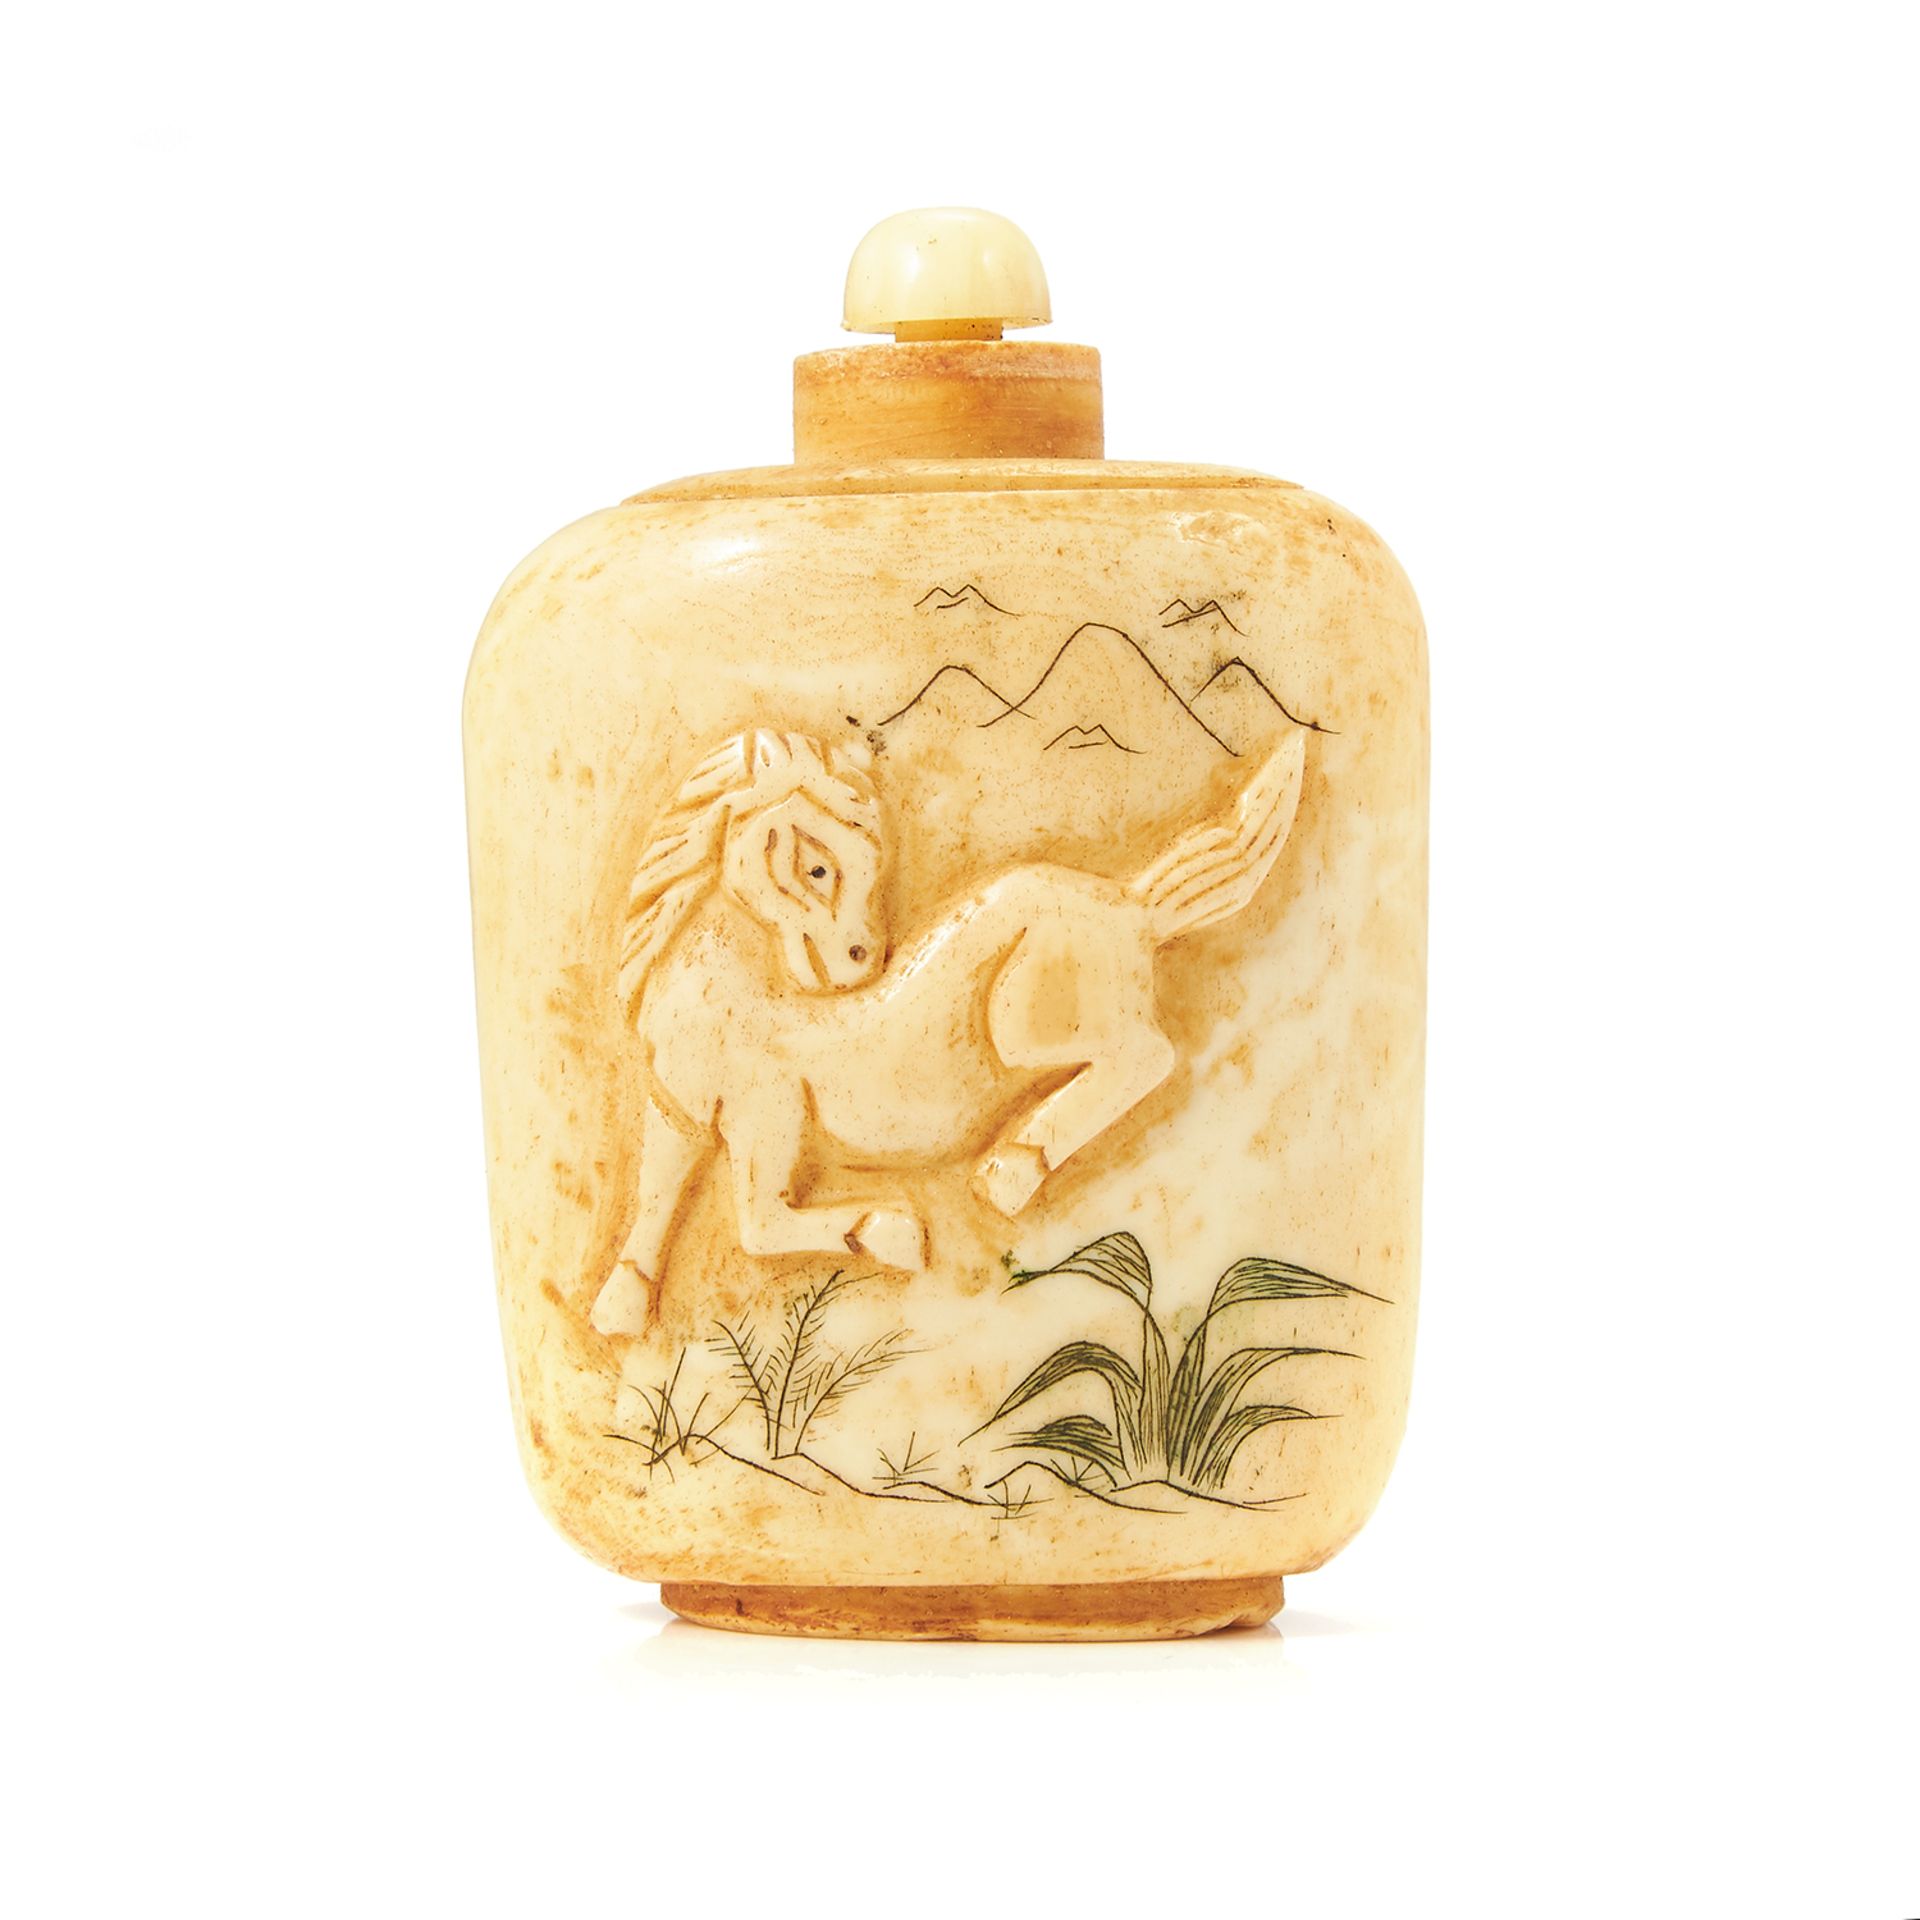 AN ANTIQUE CHINESE CARVED IVORY SNUFF BOTTLE, 19TH CENTURY 7.0cm.